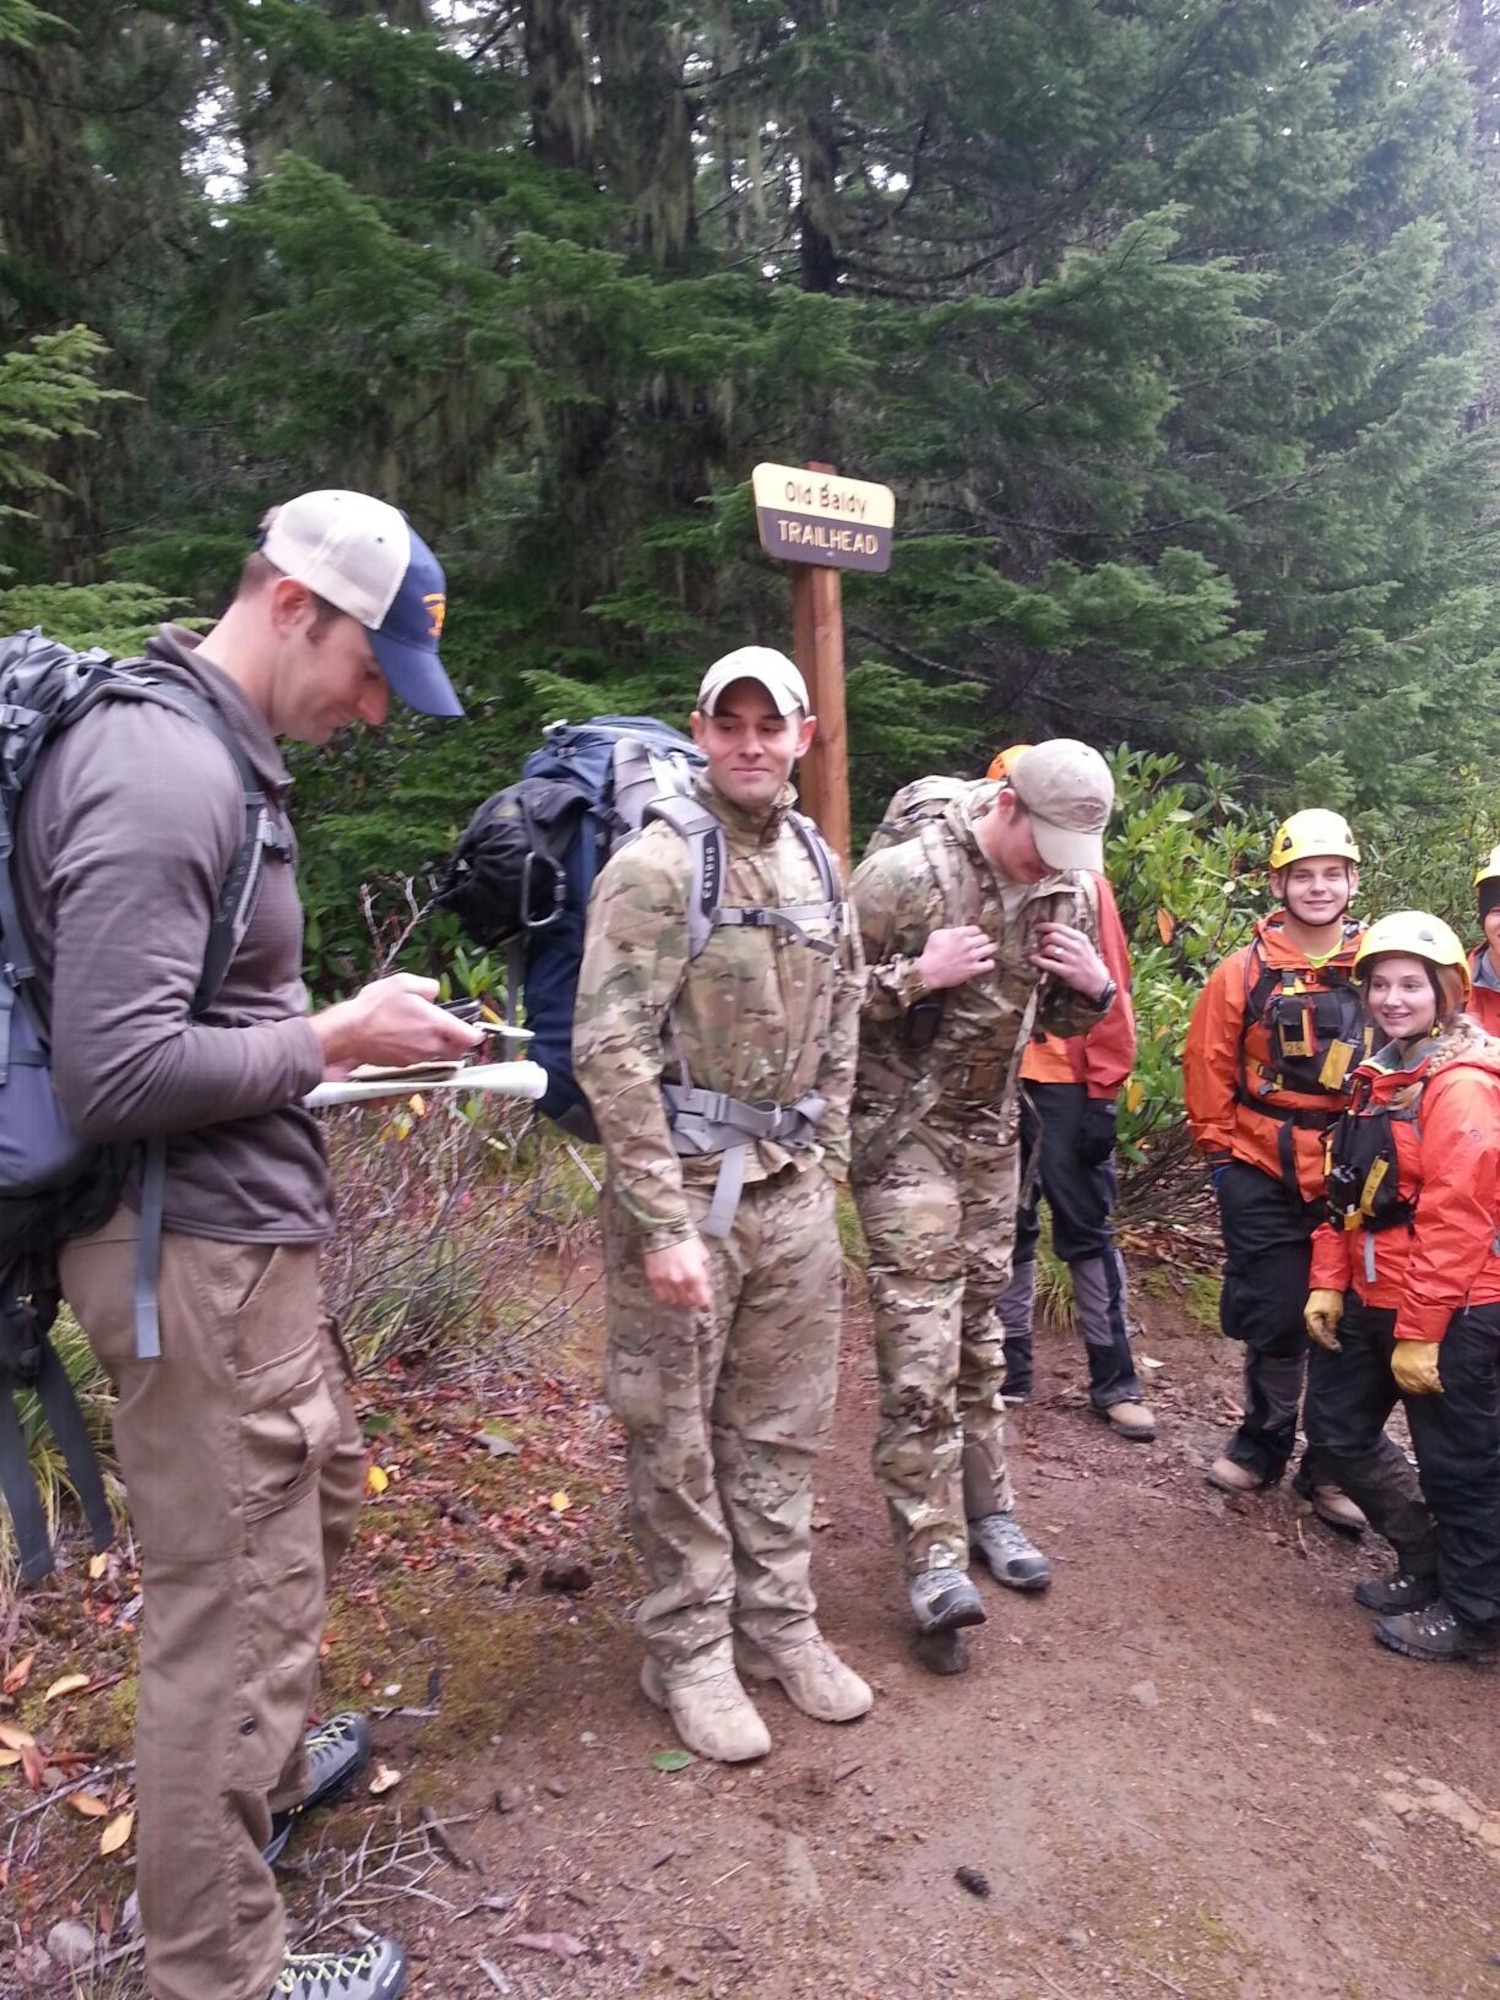 Senior Master Sgt. Josiah Blanton, (left), 304th Rescue Squadron Guardian Angel team leader, plots rescue coordinates prior to embarking on a search and rescue mission with Guardian Angel Airman and search and rescue volunteers October 26, 2015. The teams ultimately rescued two men who went missing in the remote Oregon wilderness area, 19 miles east Estacada, 45 miles east of Portland. (U.S. Air Force photo/Maj. Chris Bernard)
